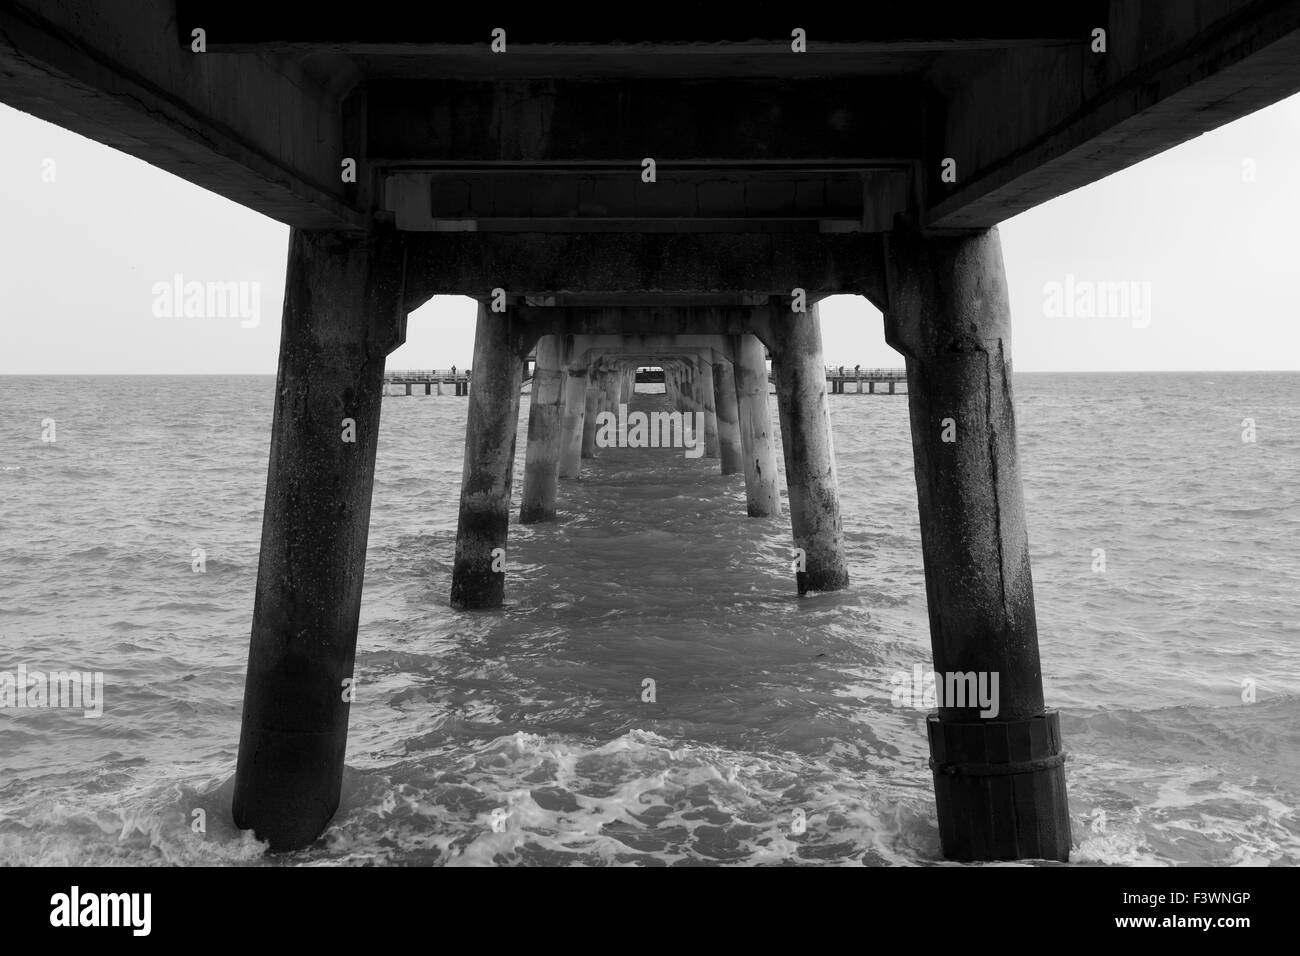 View from the underneath of deal pier (Kent, UK) Stock Photo